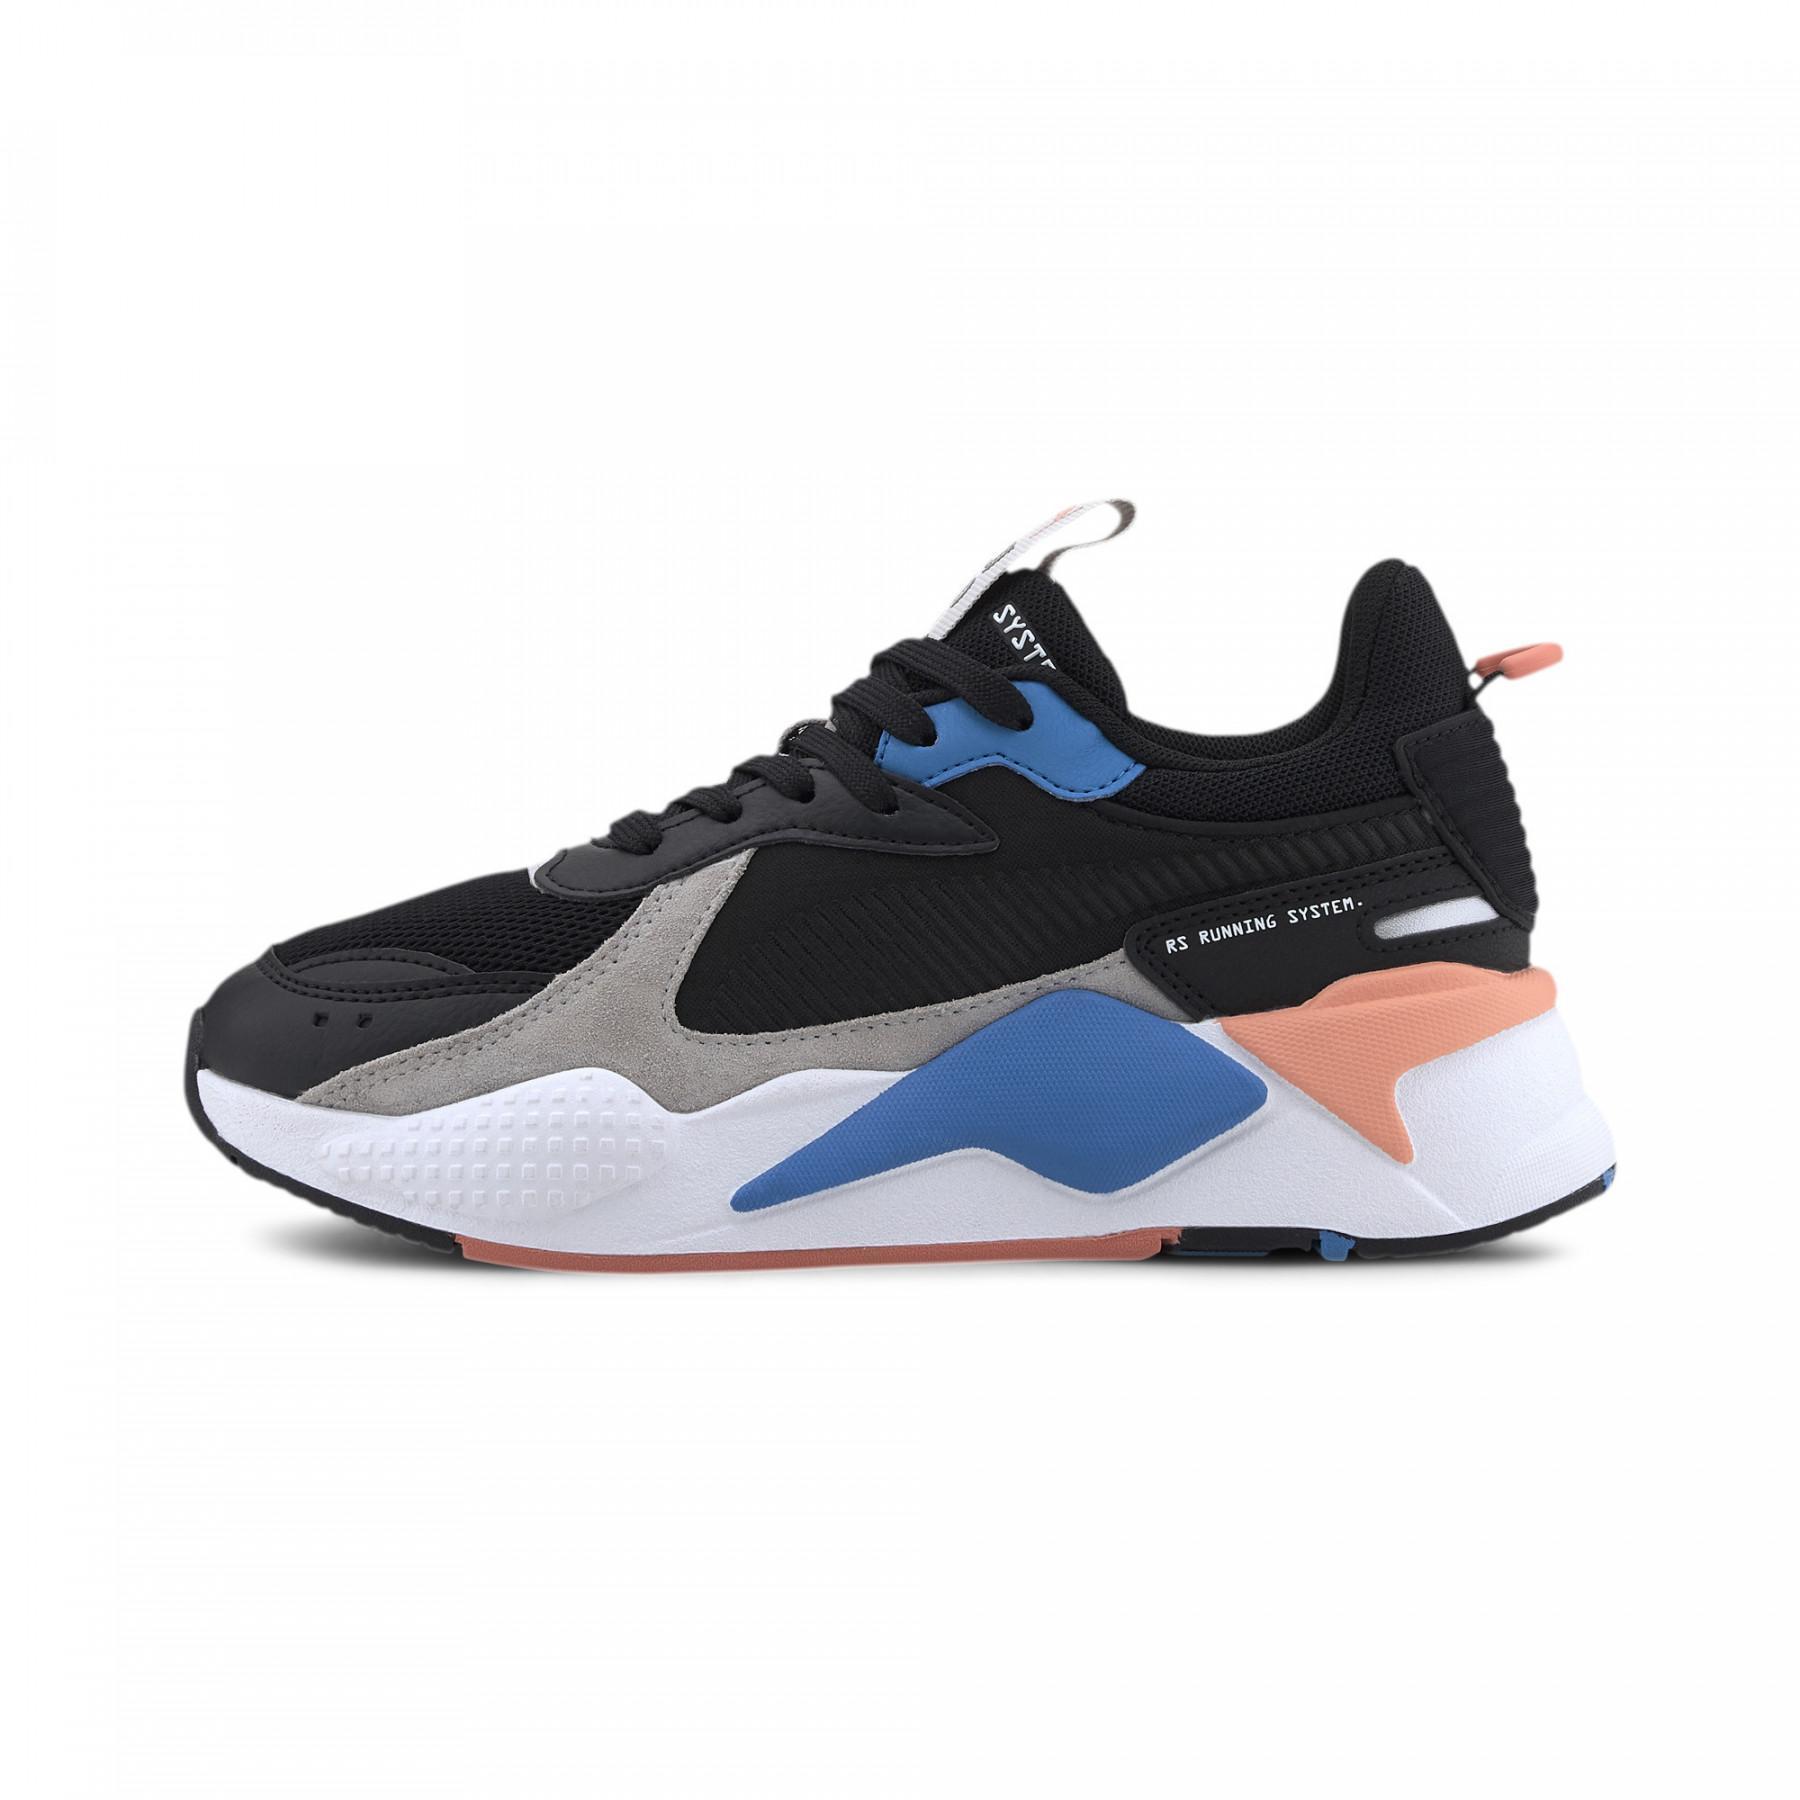 Children's sneakers Puma RS-X Monday